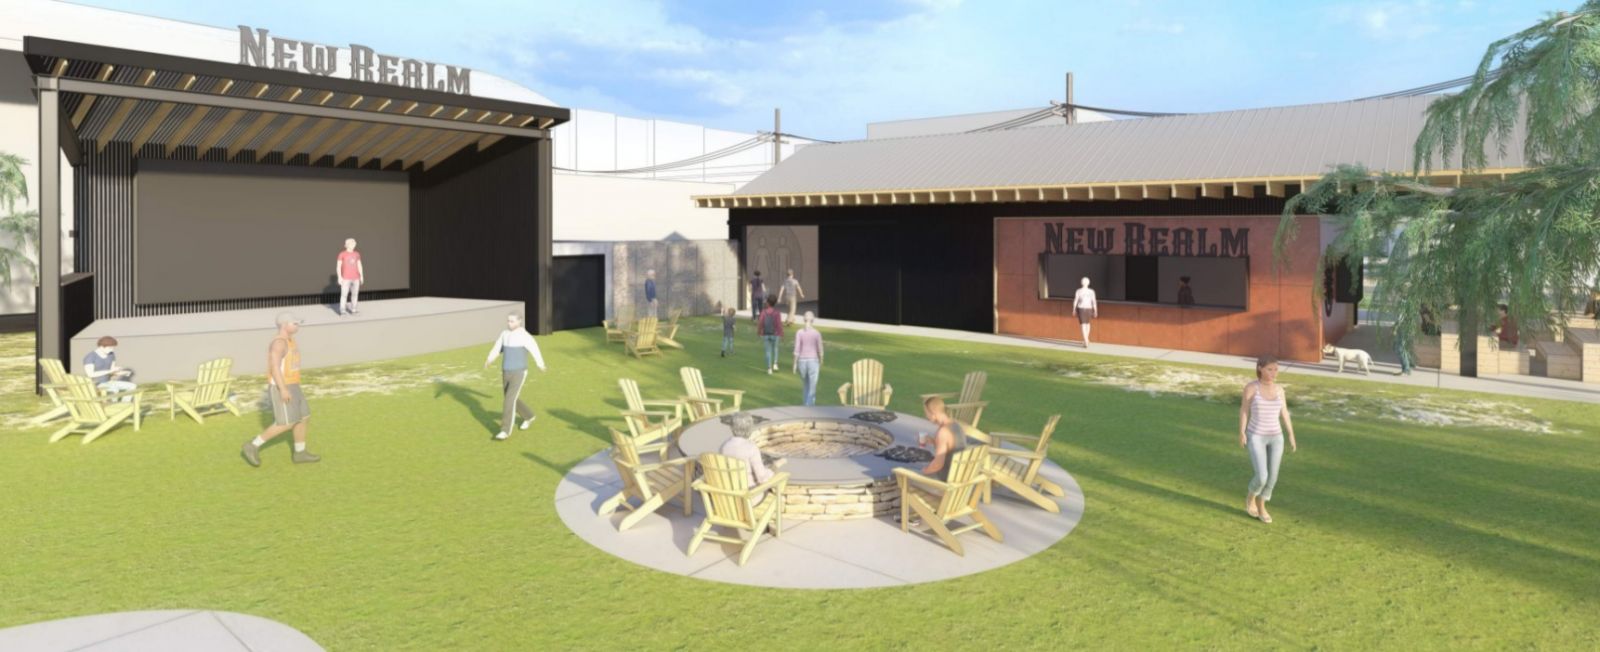 The New Realm Brewing Co. Greenville facility will be the brewery‰Ûªs fourth location. (Rendering/Provided)